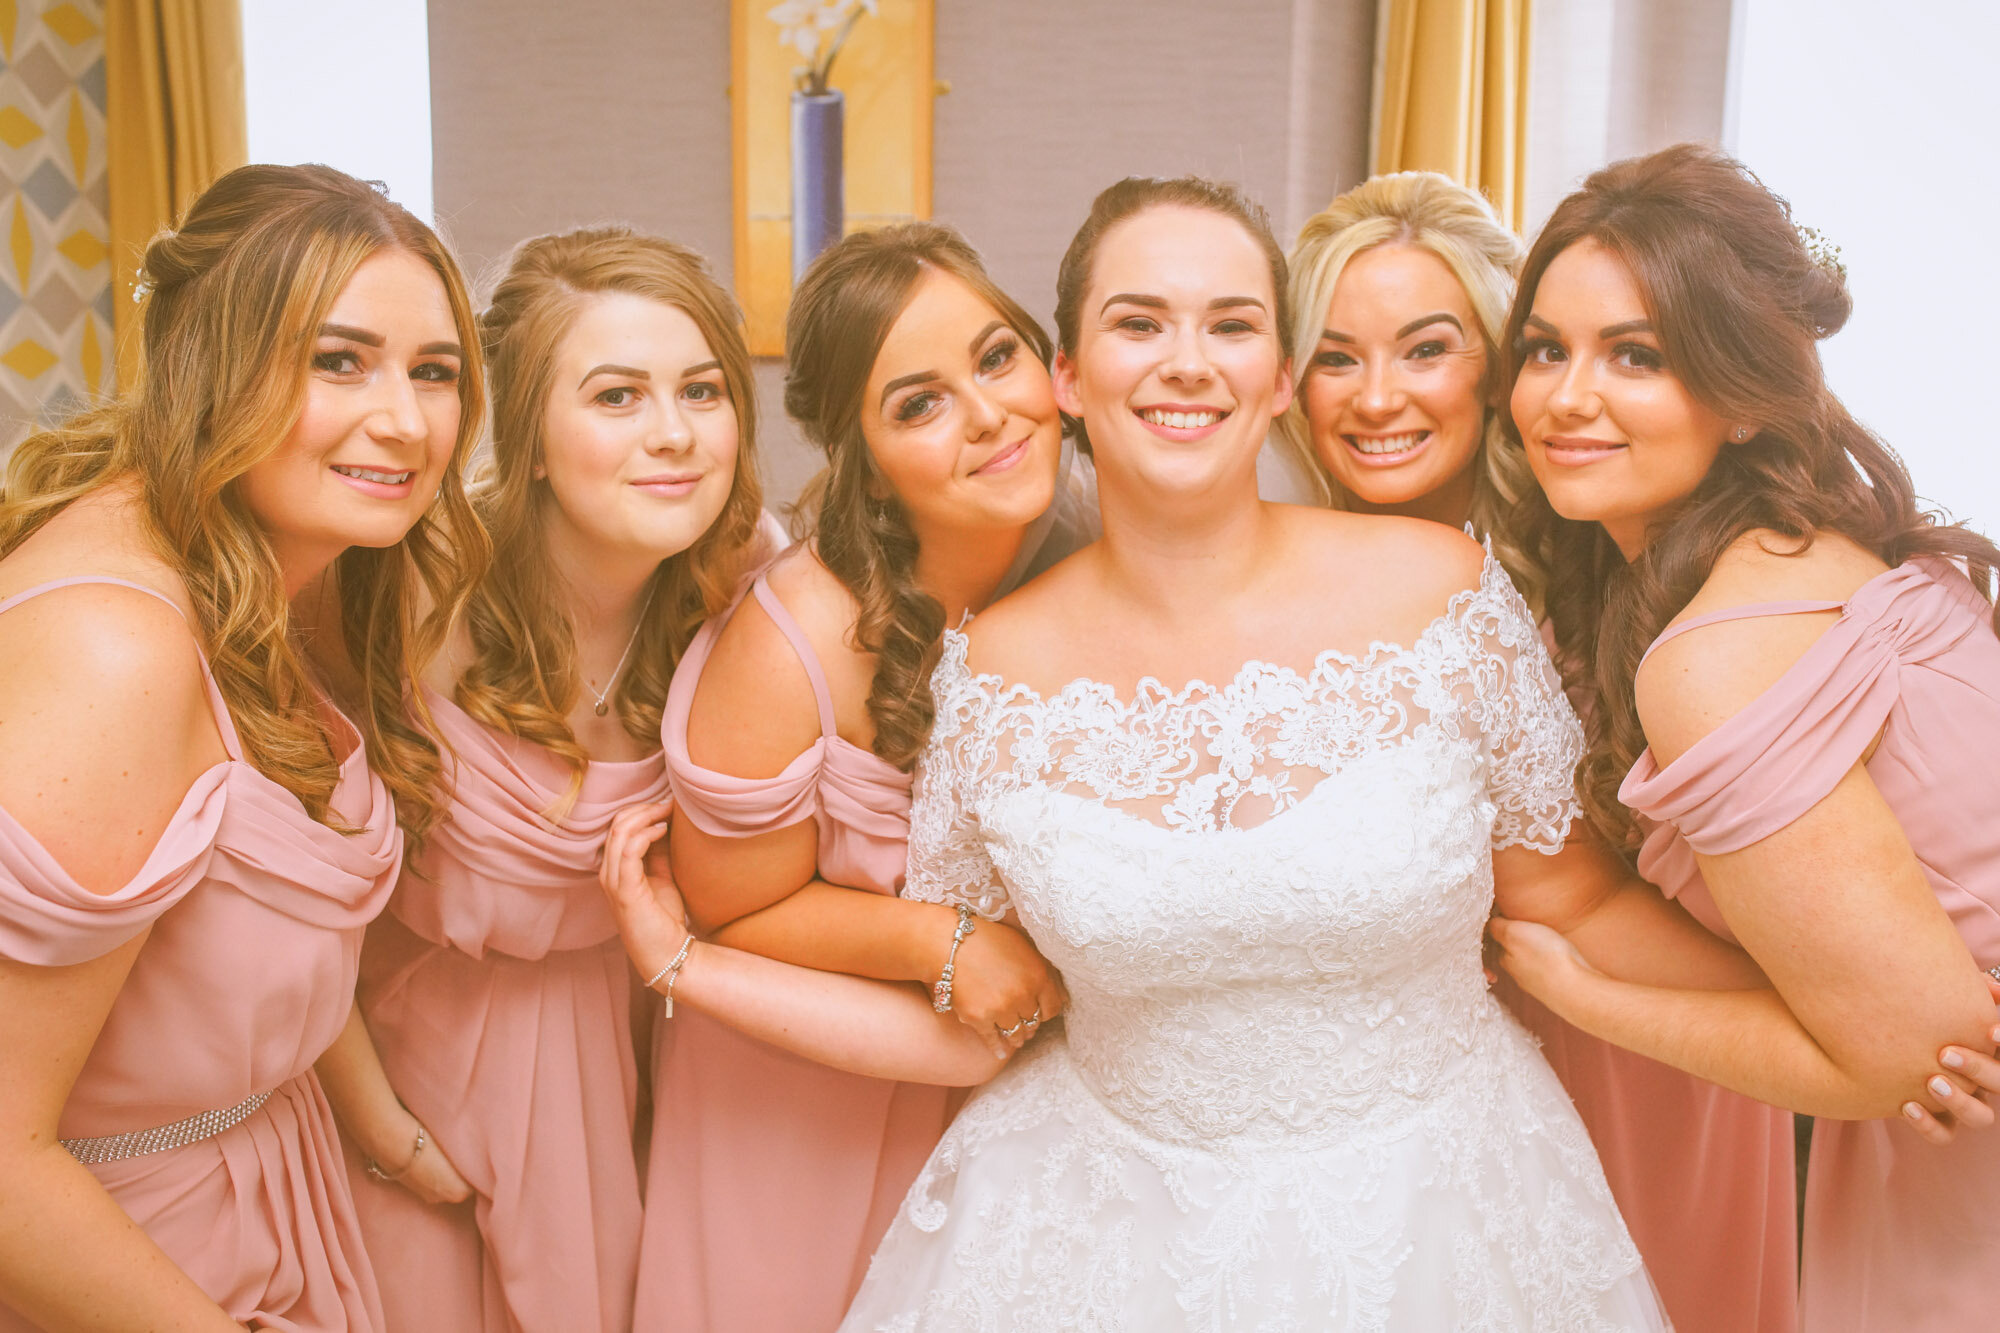 Shiny Memories North Wales Wedding Photographers - The Beaches - Pentre Mawr Country House-20.jpg